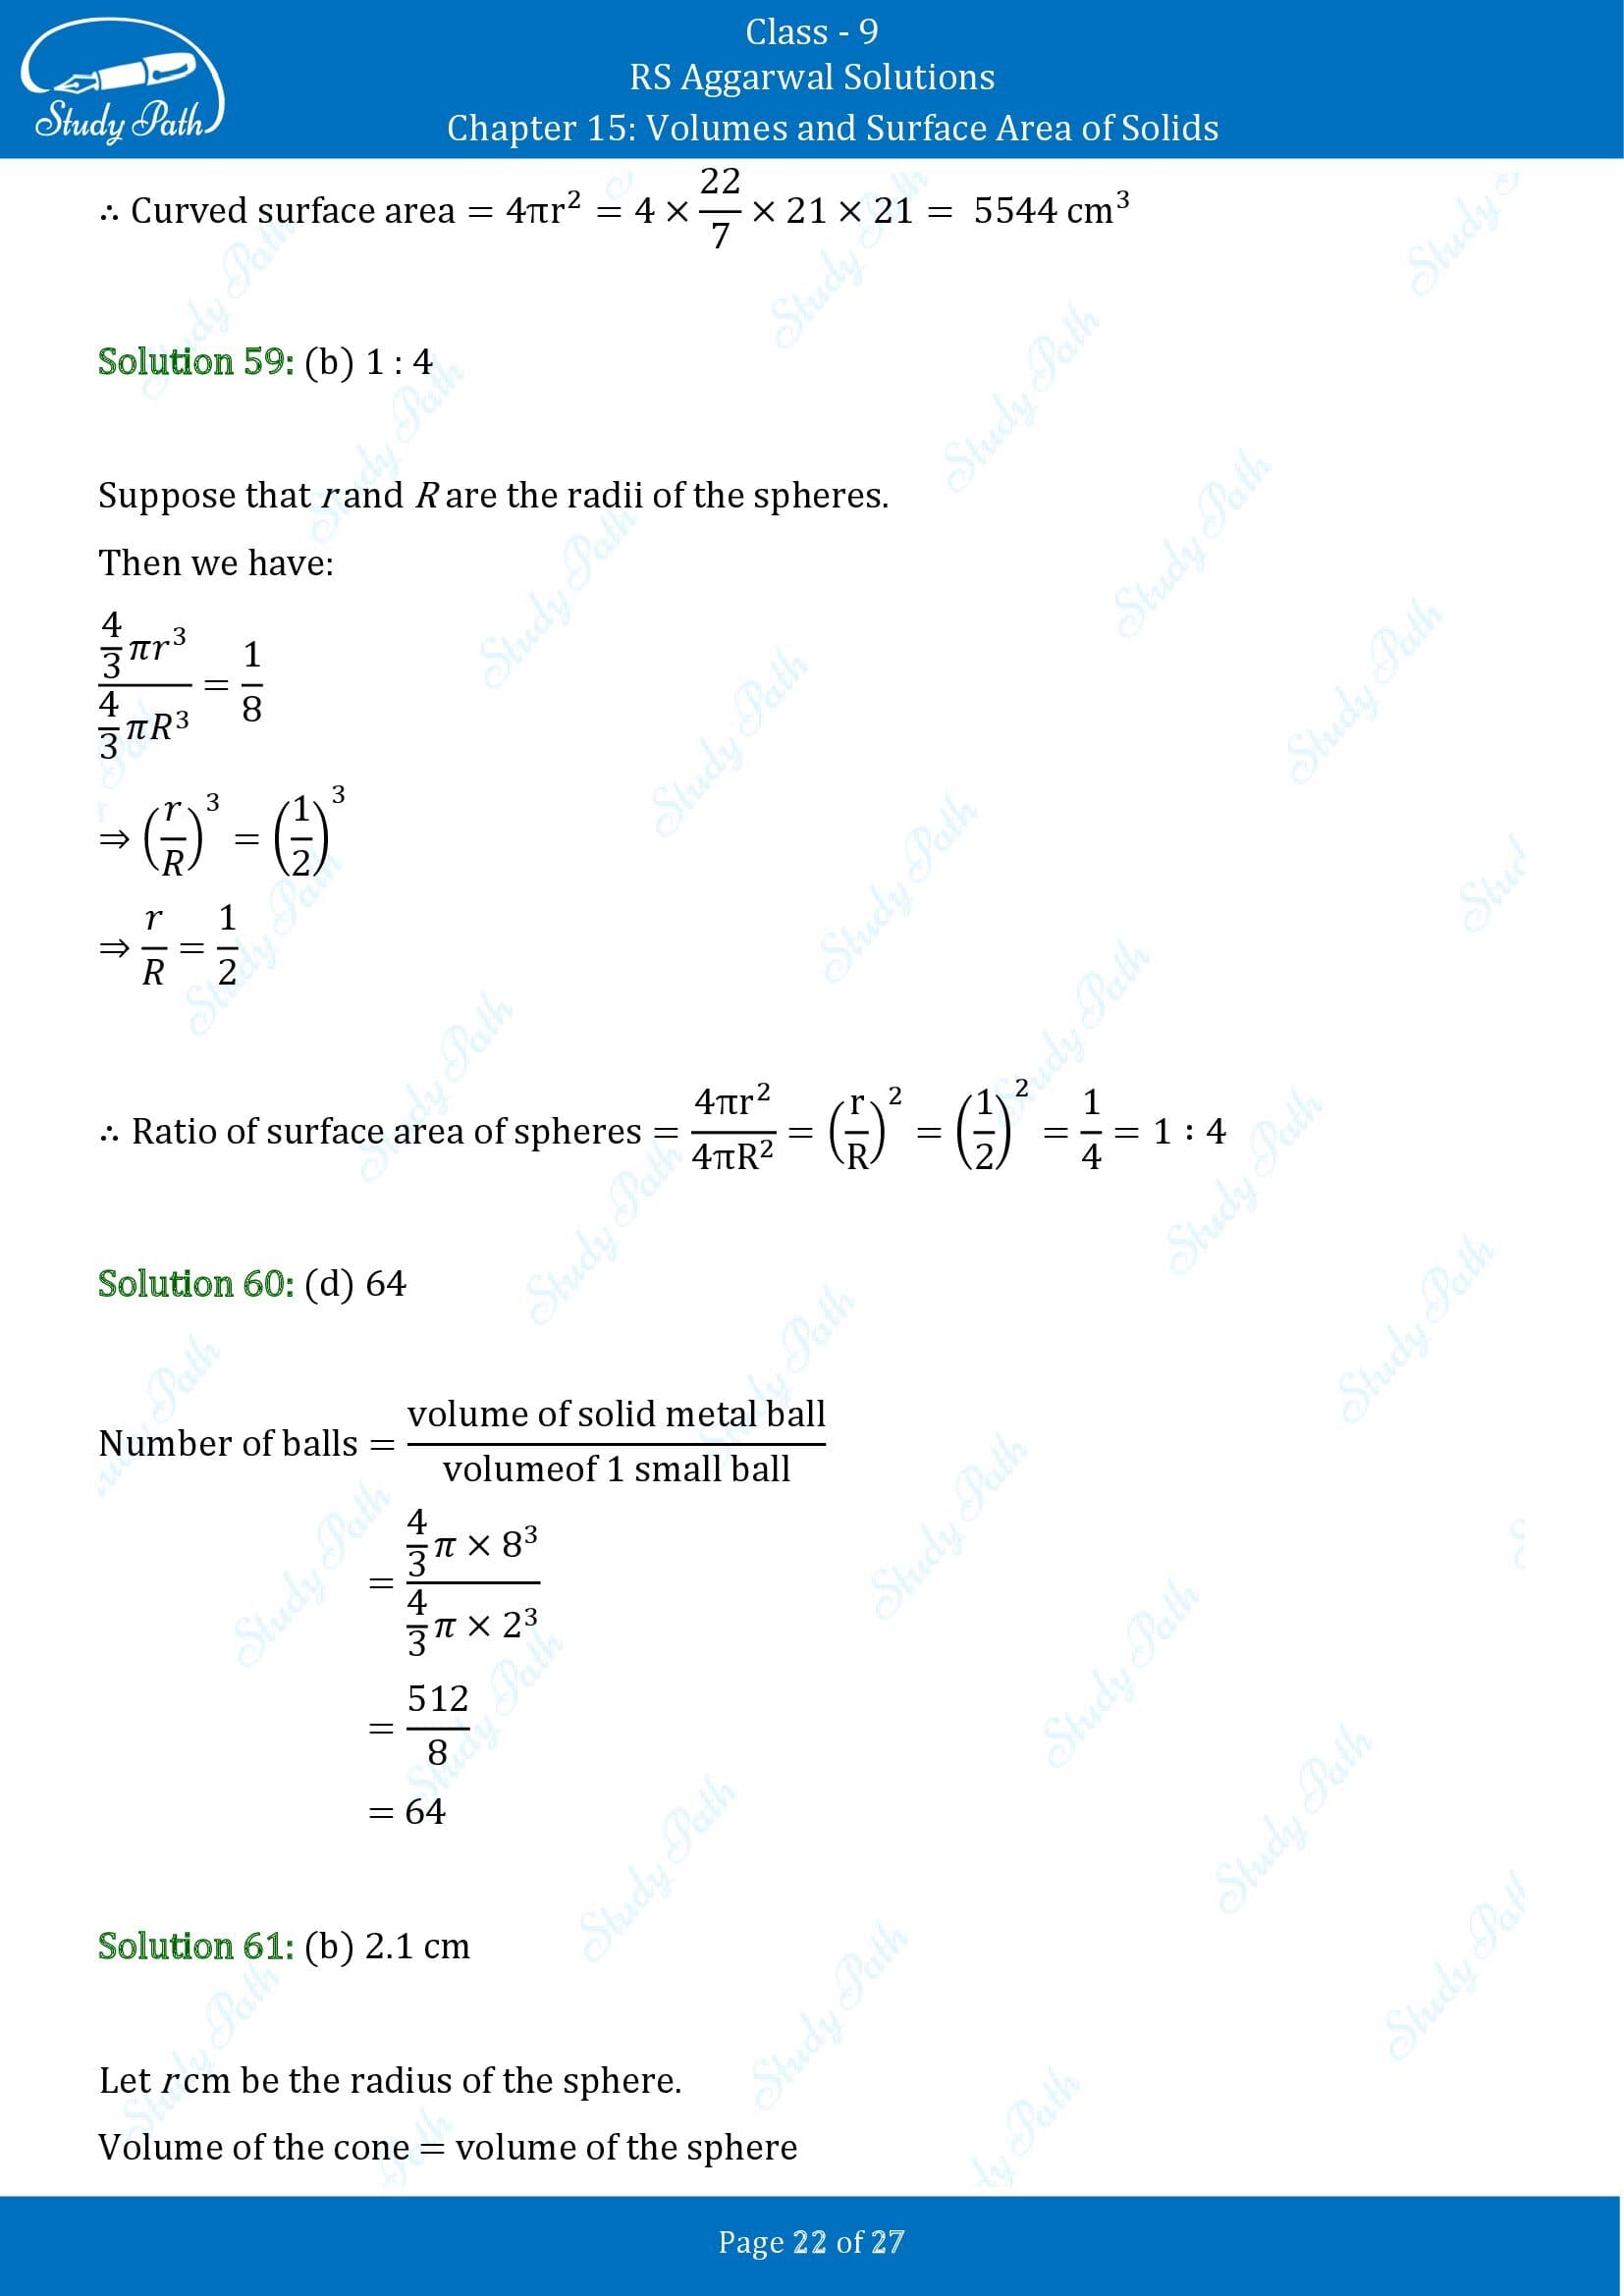 RS Aggarwal Solutions Class 9 Chapter 15 Volumes and Surface Area of Solids Multiple Choice Questions MCQs 00022